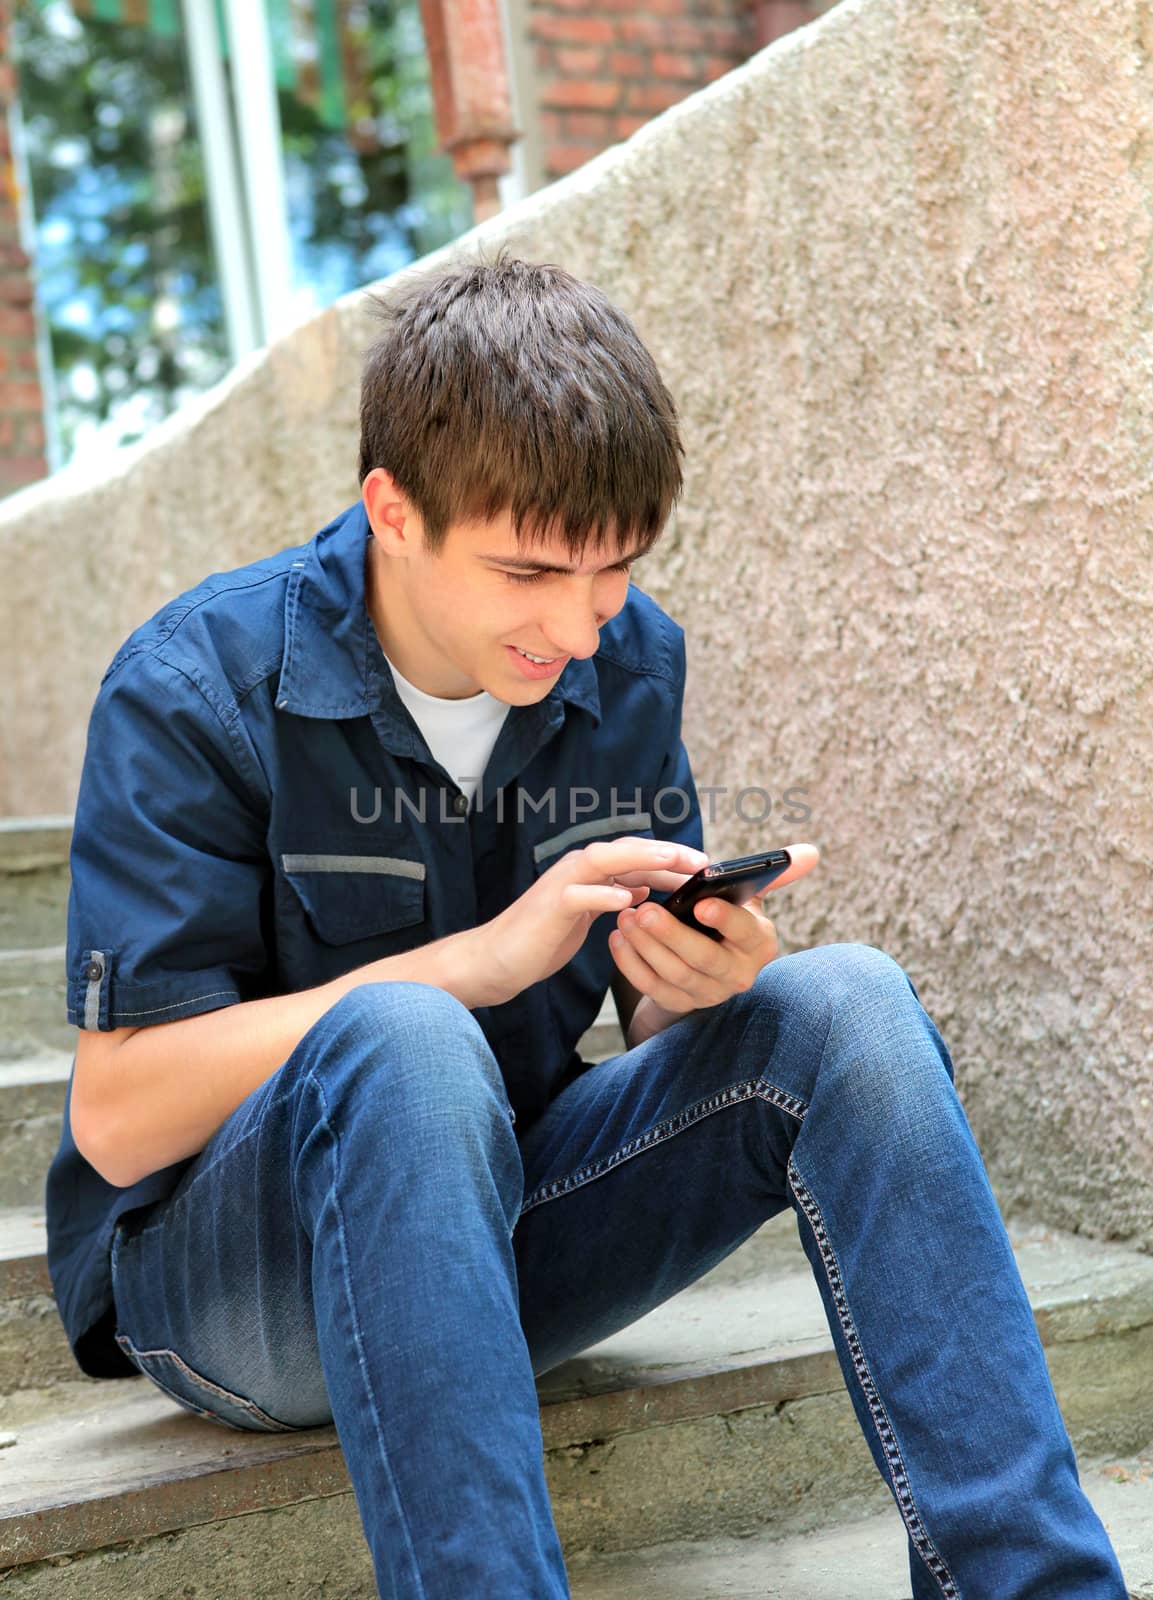 Cheerful Teenager with Cellphone on the landing steps